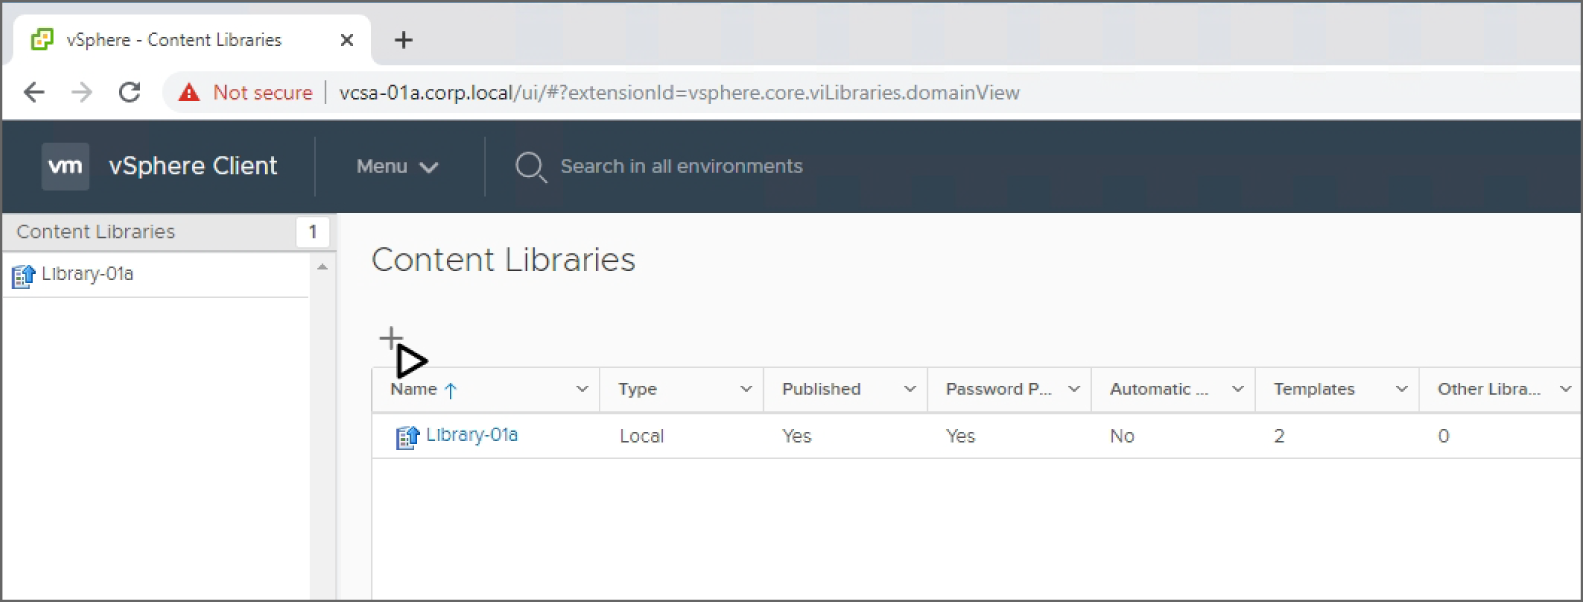 Snapshot of clicking the plus sign to launch the New Content Library wizard.